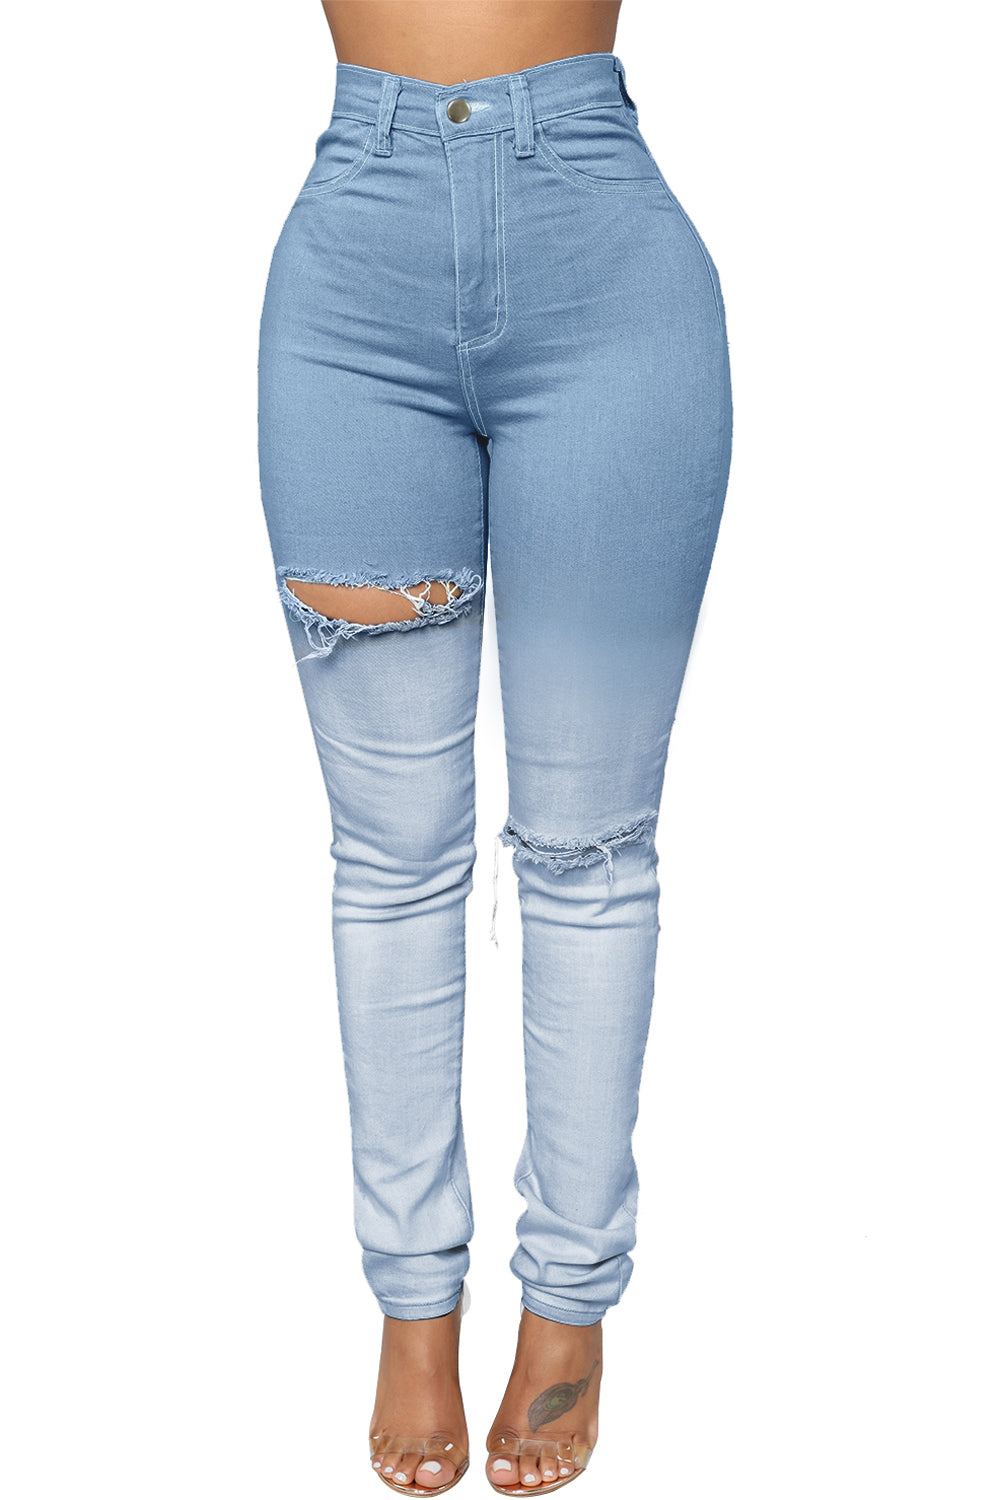 Gradient Color Slim-fit Distressed High Rise Jeans (S-XL) - Southern Peach 